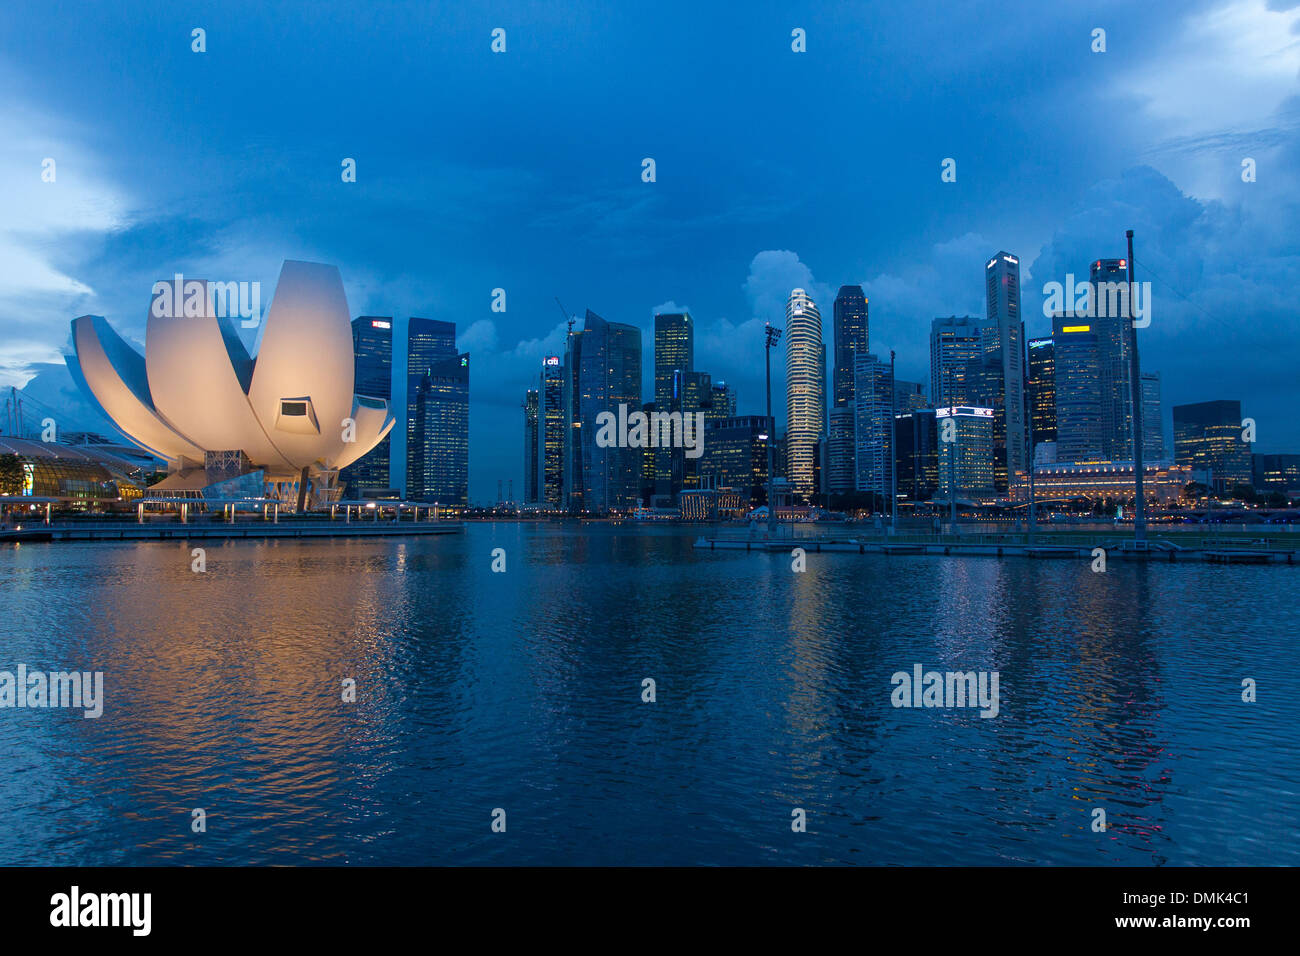 NIGHT FALLING OVER MARINA BAY, THE LOTUS FLOWER-SHAPED DOME OF THE ART SCIENCE MUSEUM AND THE BUILDINGS IN THE CENTRAL BUSINESS DISTRICT, SINGAPORE Stock Photo